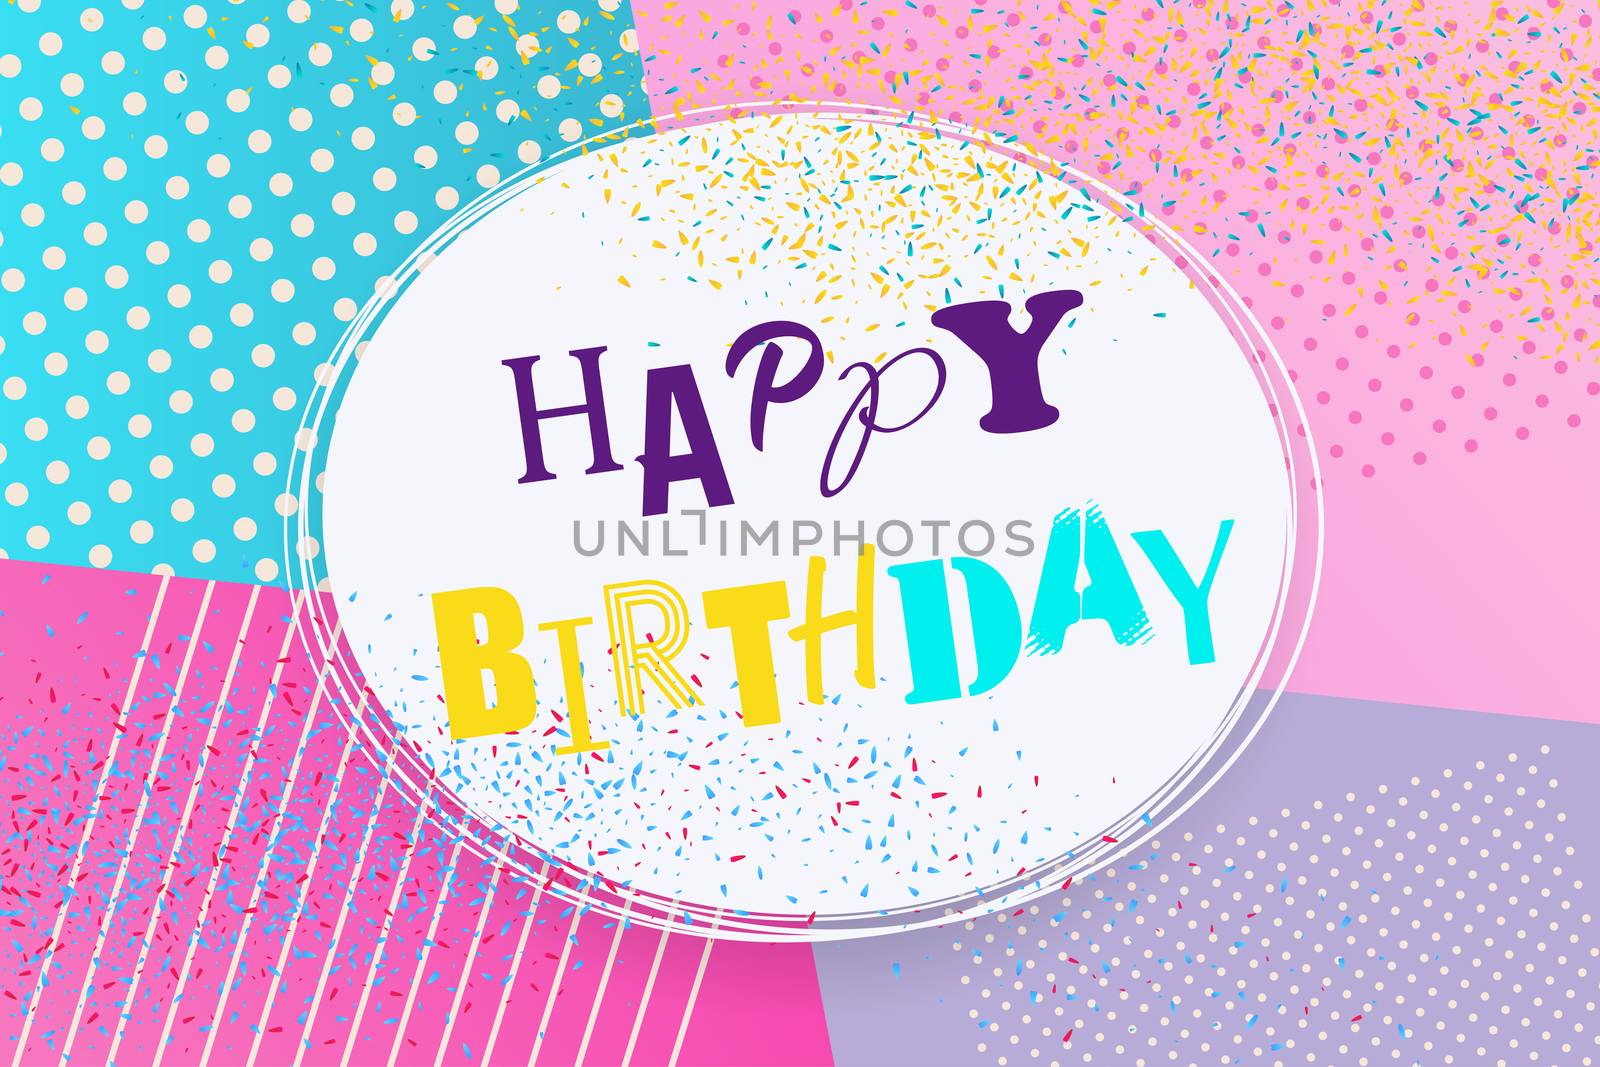 Happy birthday background Memphis style. Retro holiday backdrop 80s 90s pop art. Comic text lettering different font. Anniversary greeting poster. Halftone pattern vector illustration.